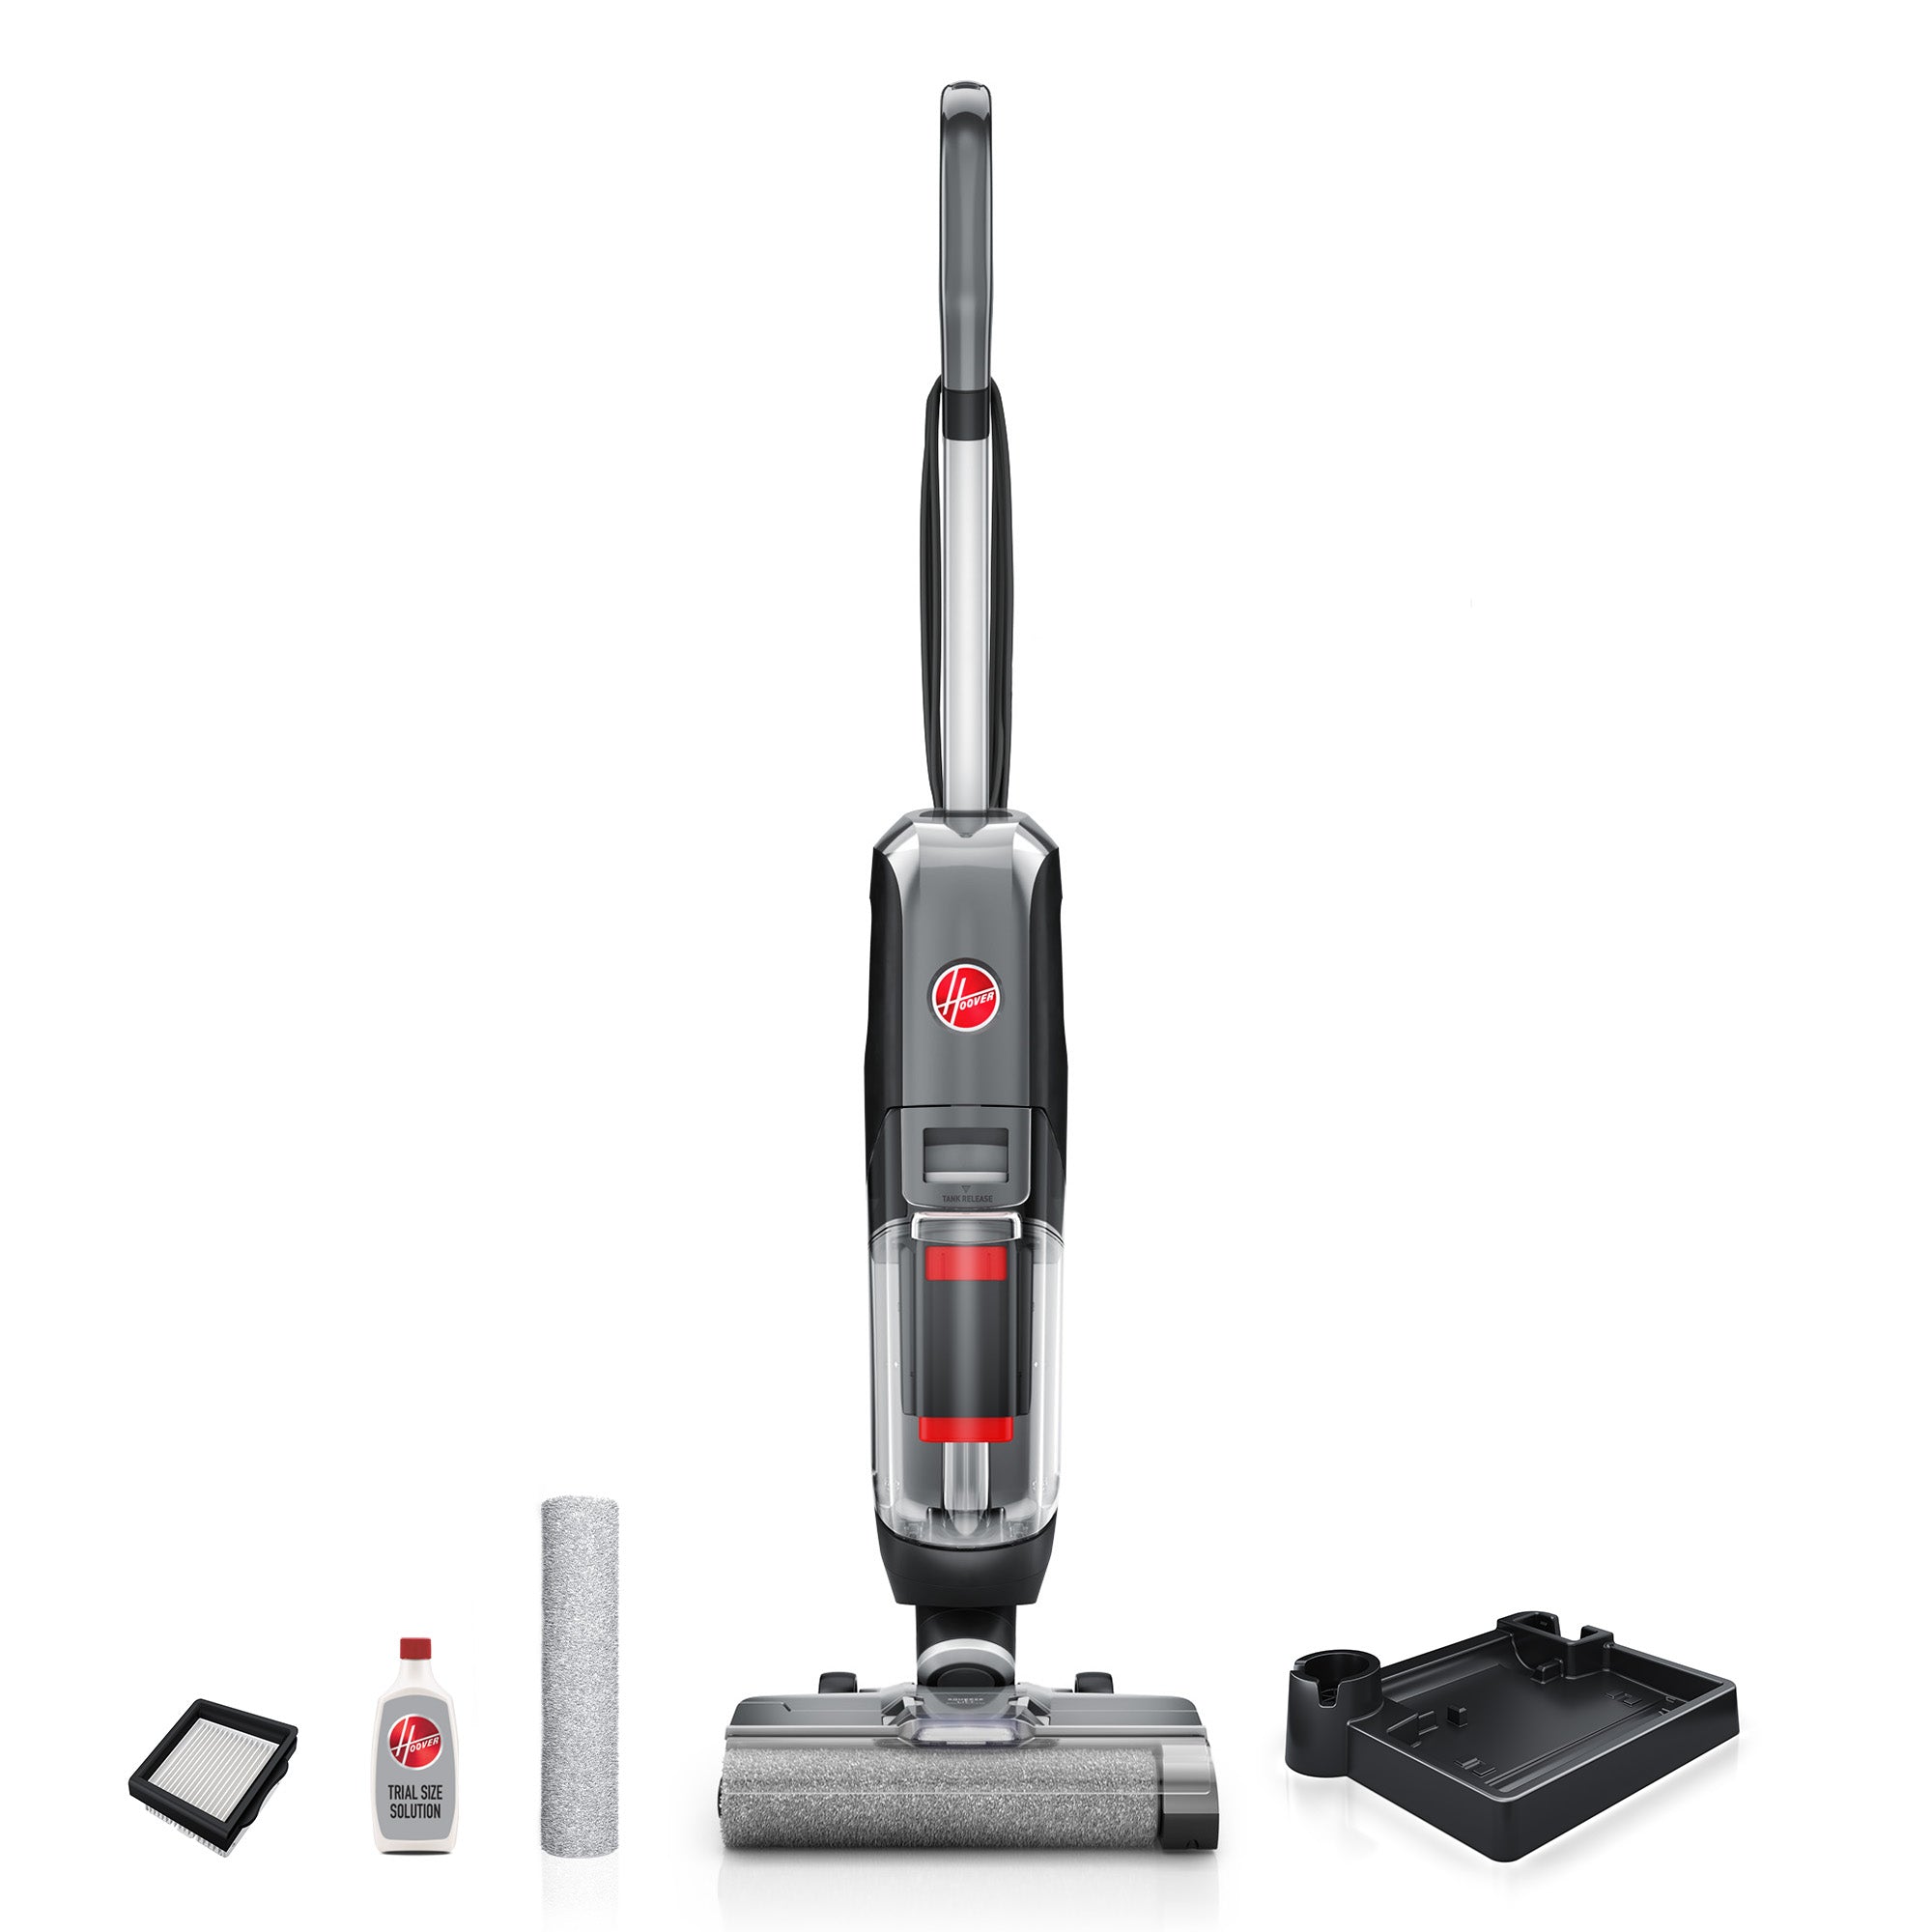 Review: This All-in-One Wet Dry Vacuum (Almost) Makes Cleaning Fun